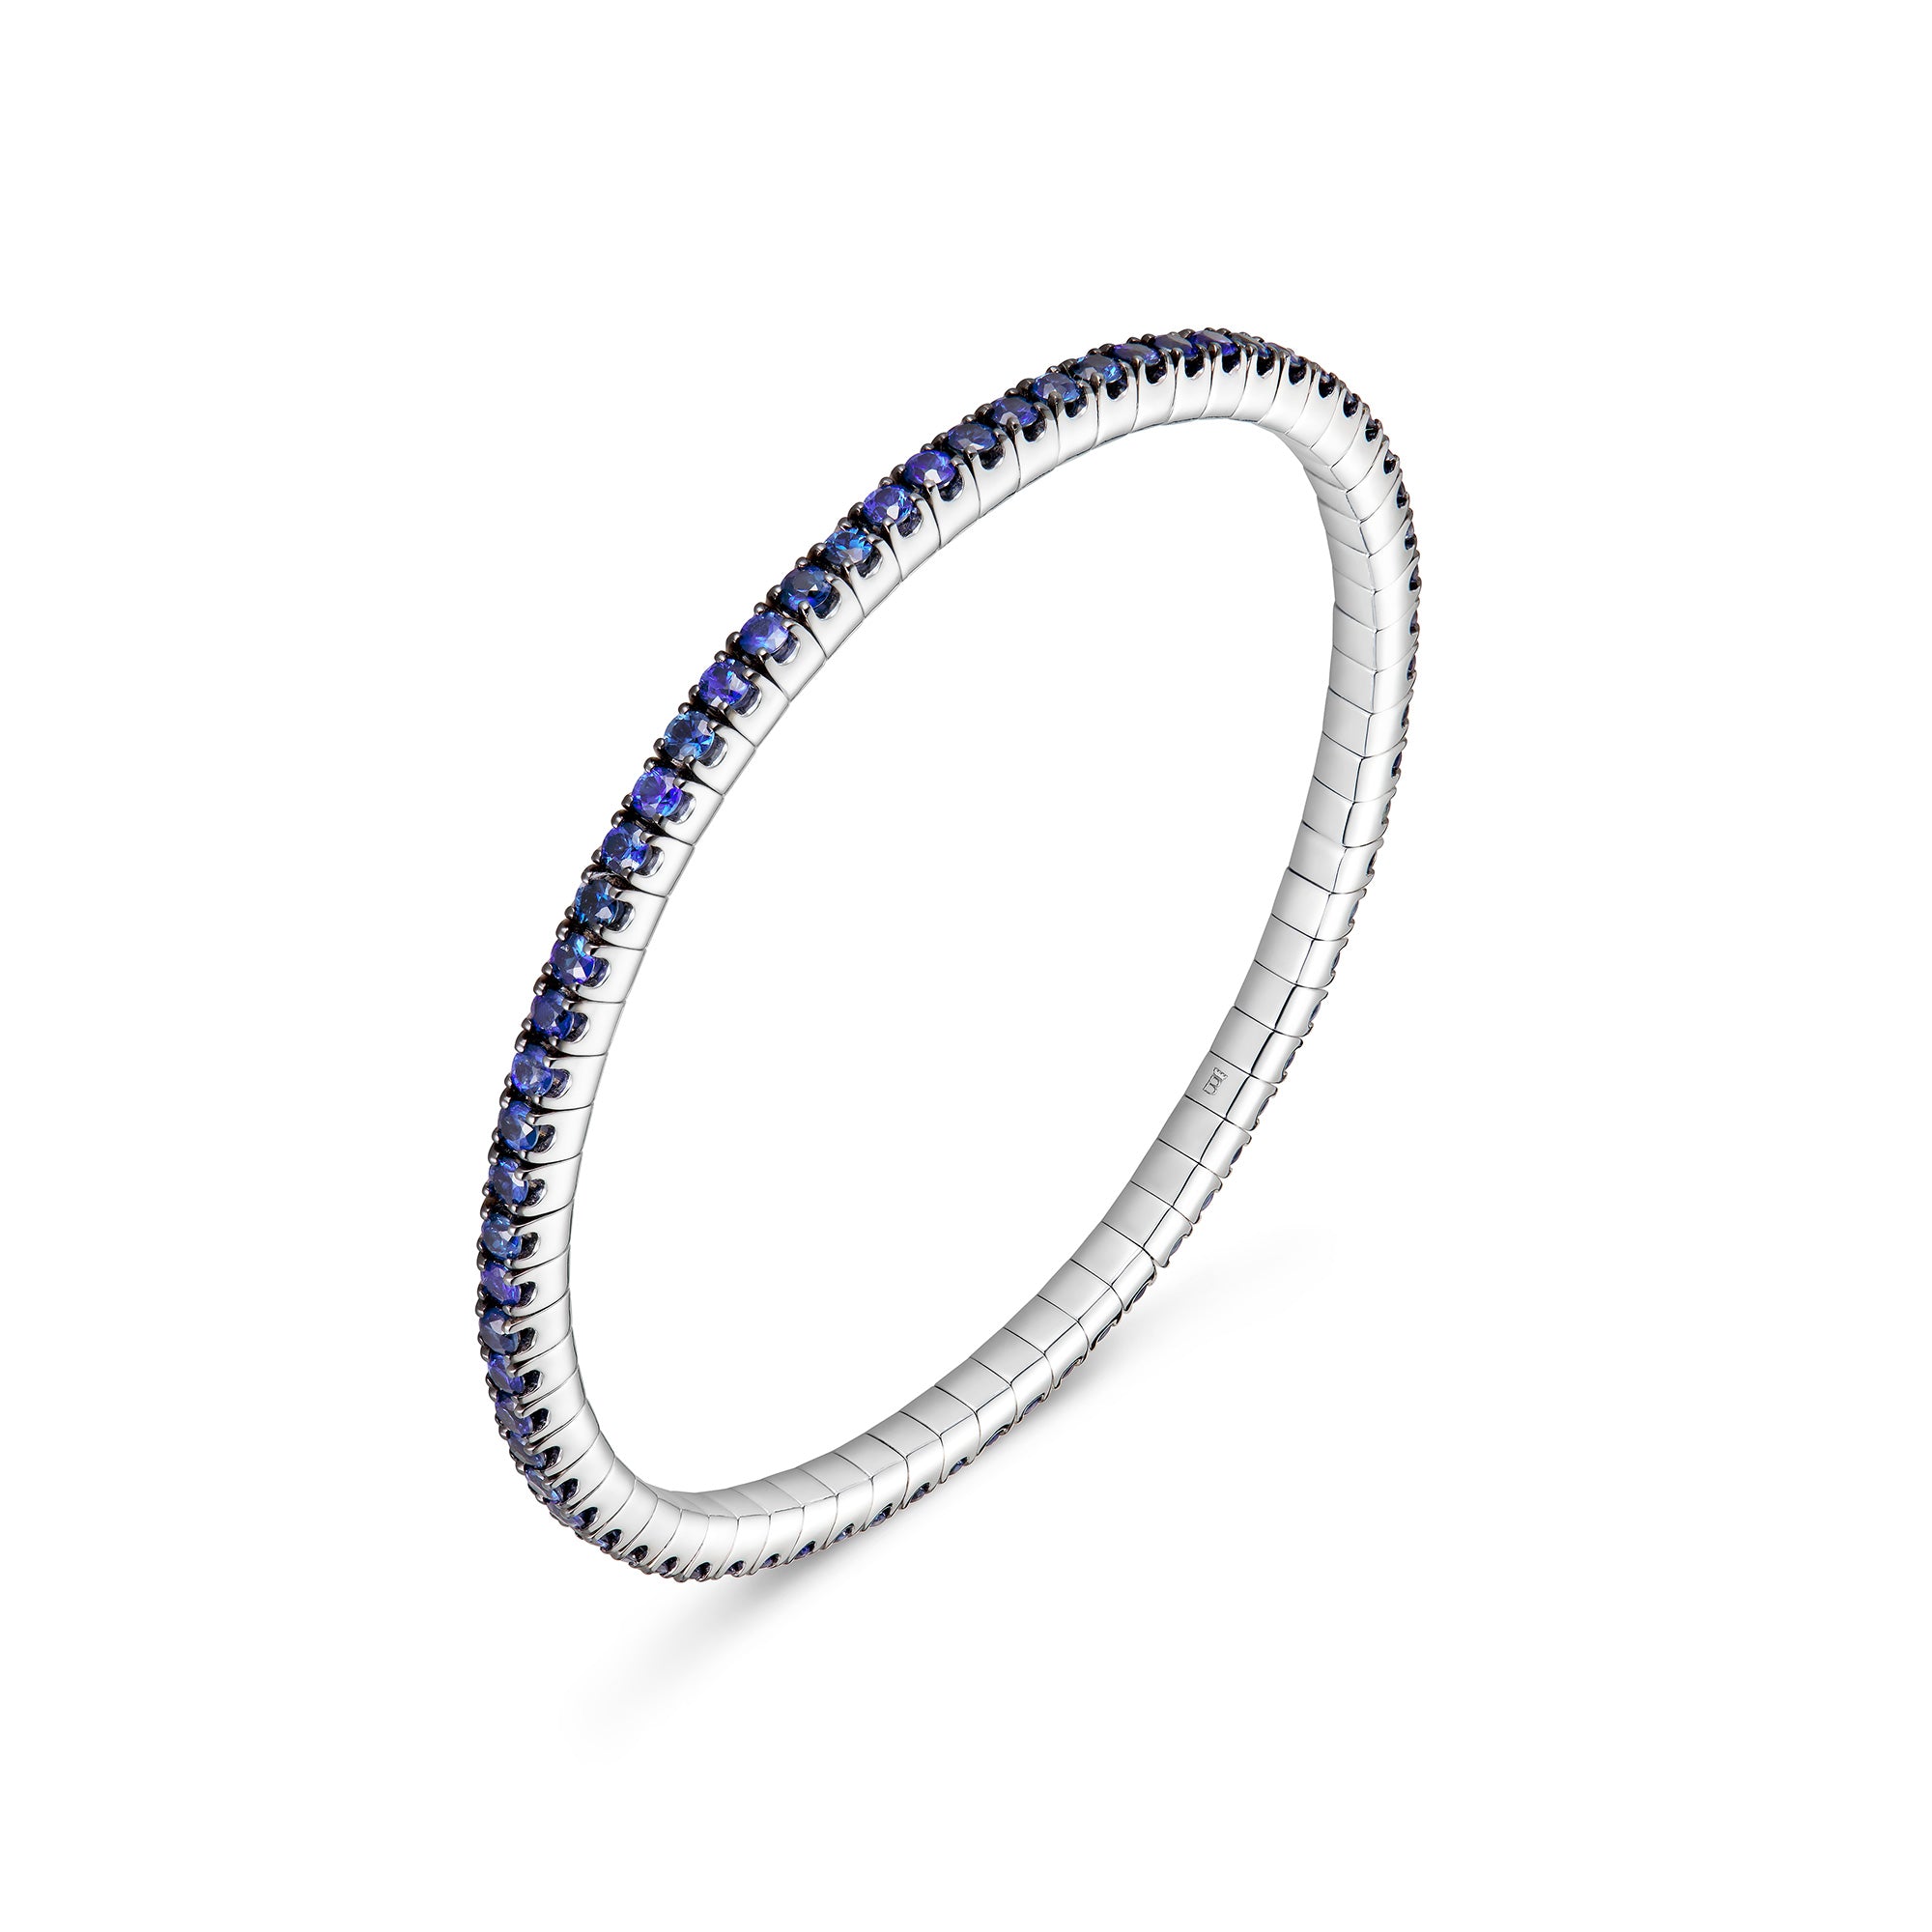 Flow bracelet white gold and sapphires